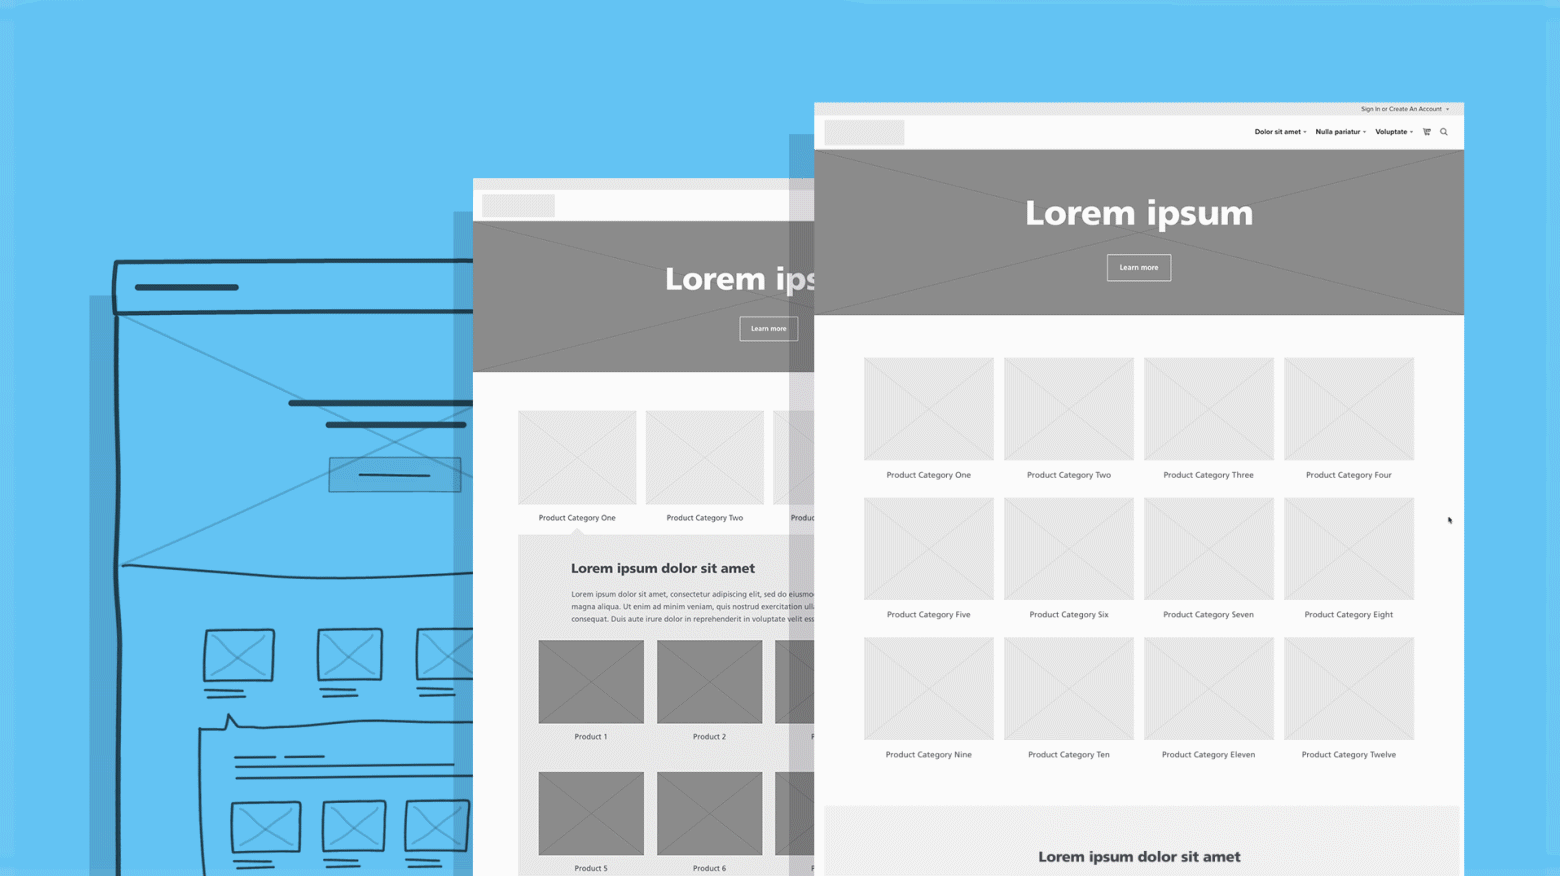 What Are the Benefits of Wireframing a Design?